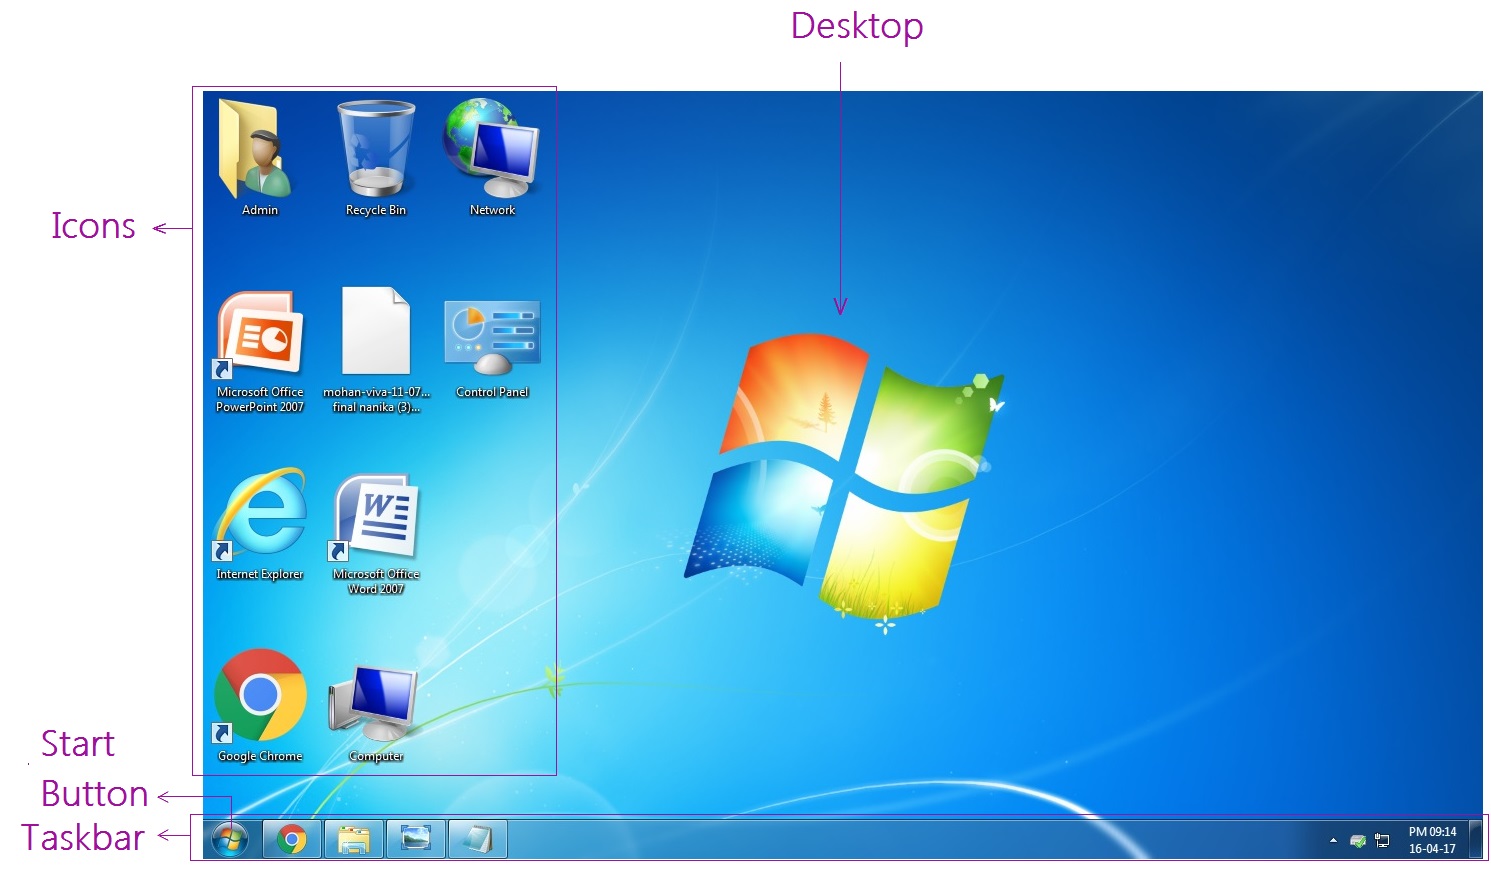 Components of Windows 7